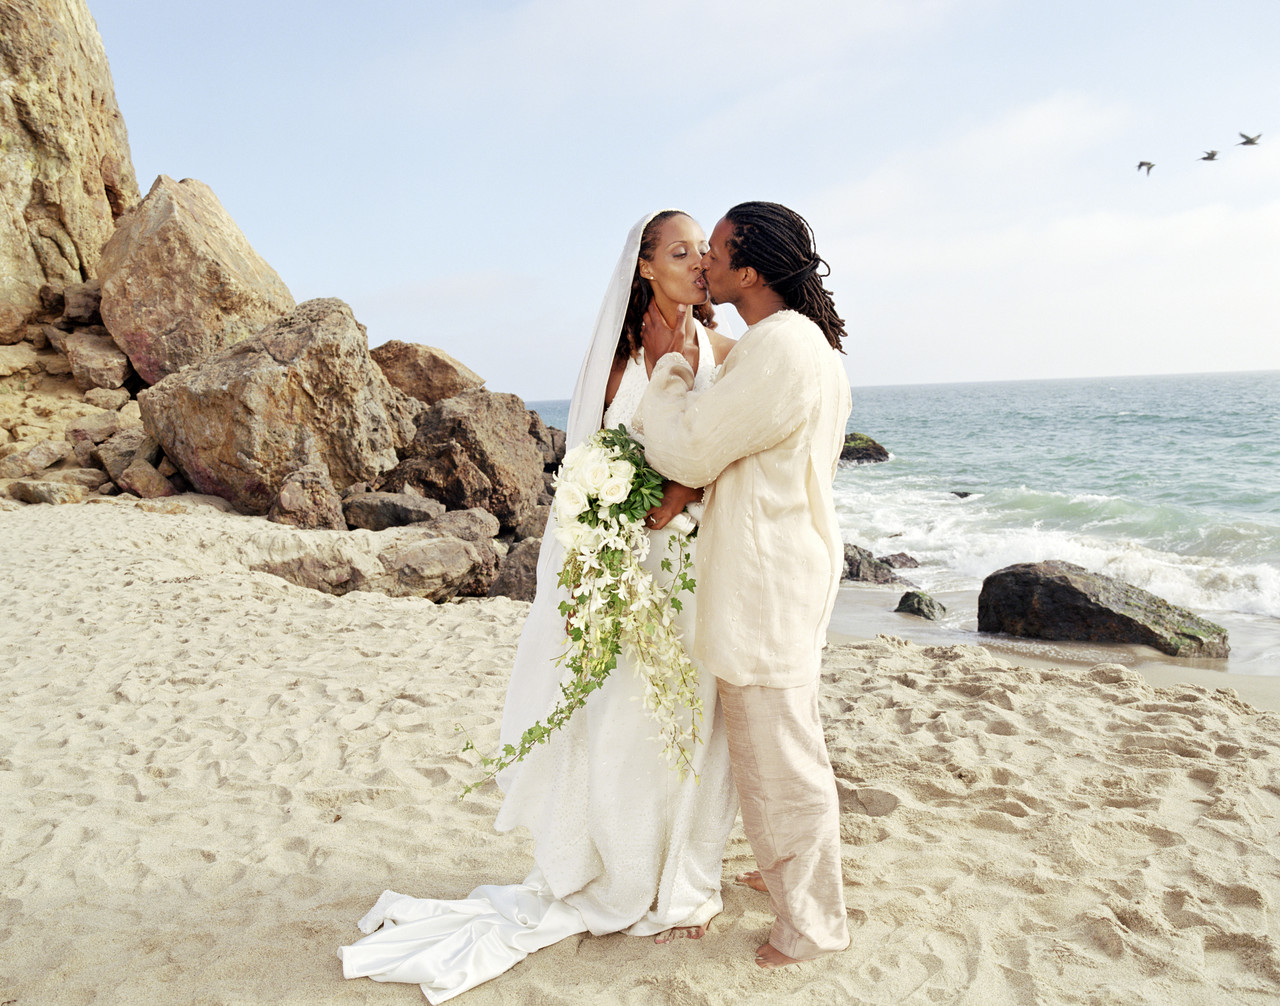 Kissing Newlyweds on the Beach